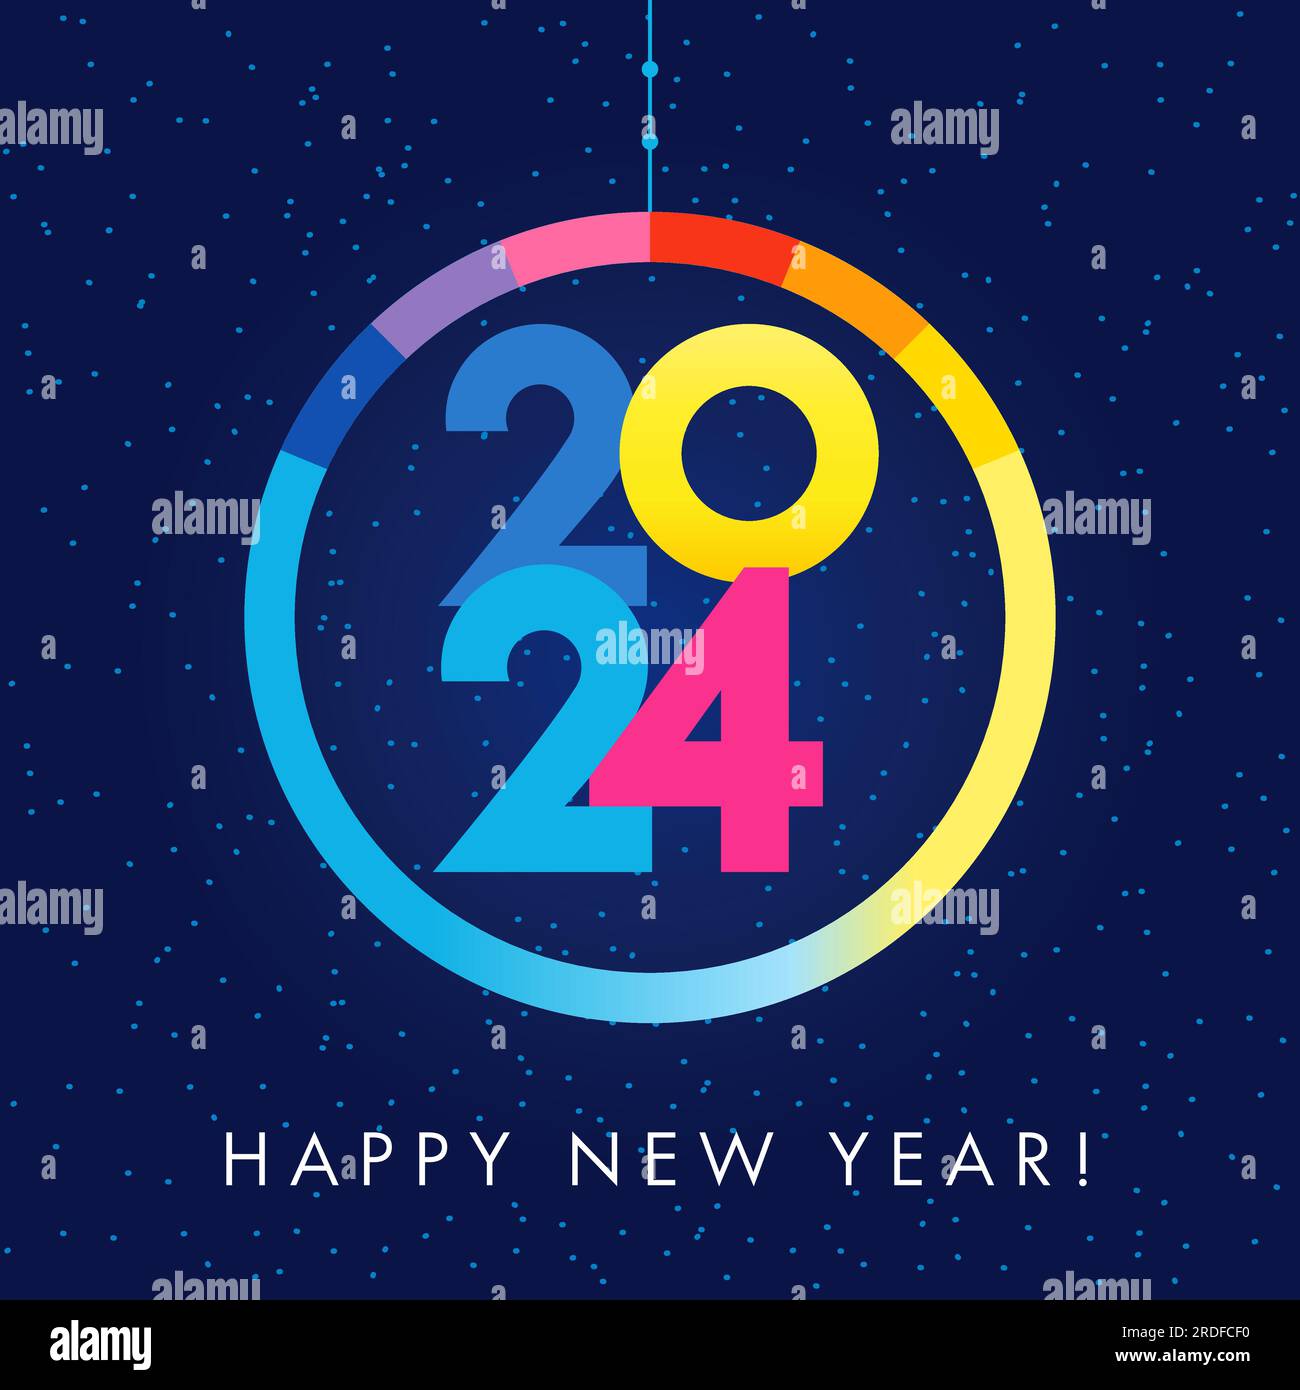 2024 Happy New Year Seasons Greetings Card Template Holiday Design With Christmas Colored Ball And 2024 Numbers Vector Illustration 2RDFCF0 